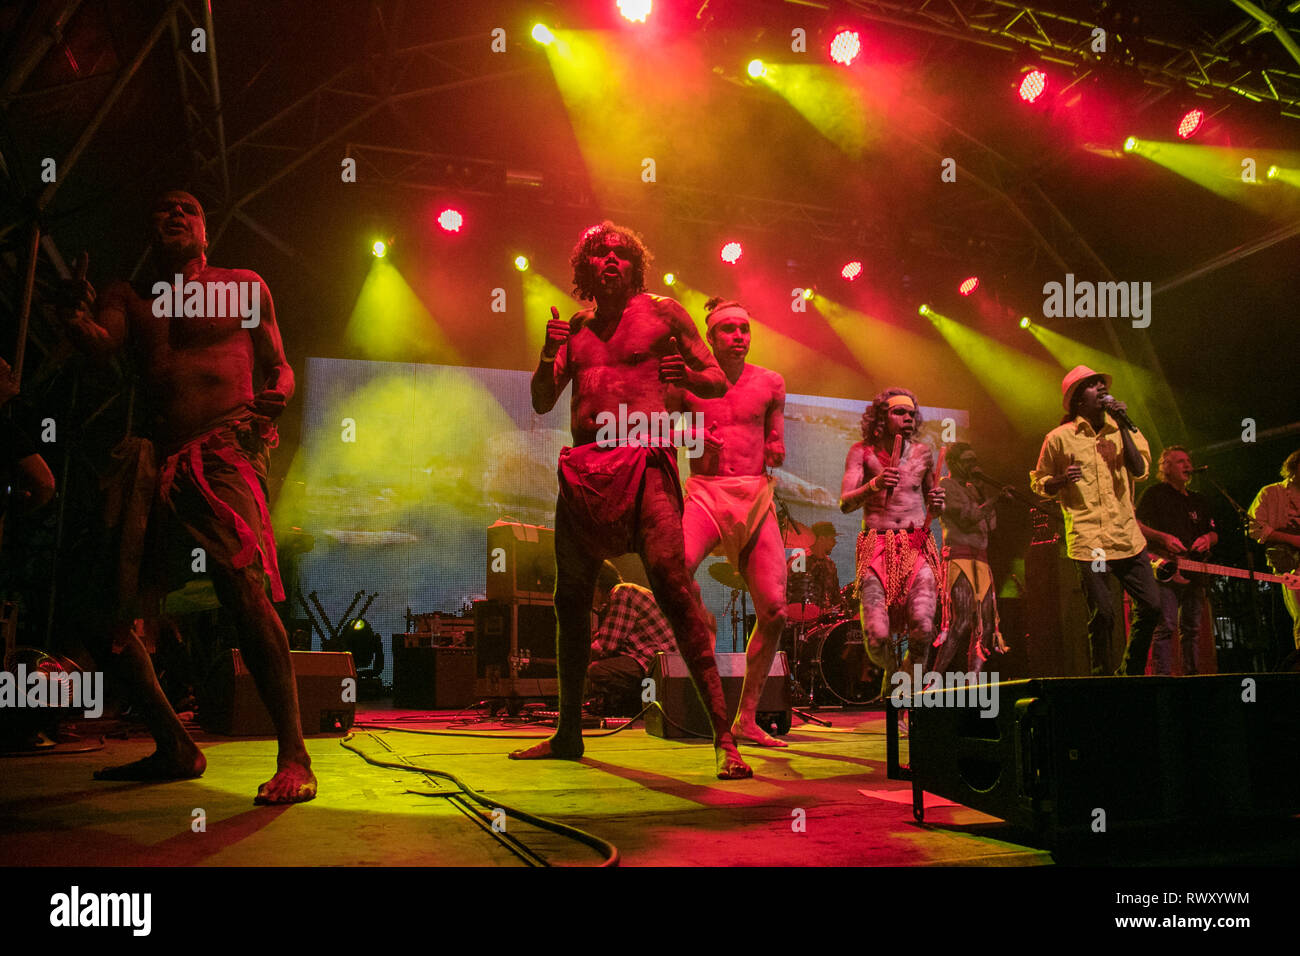 Adelaide, Australia. 7th Mar, 2019. Australian musical group Yothu Yindi  meaning "child and mother" perform at the Adelaide Fringe consist of  Aboriginal and Balanda (non-Aboriginal) members. The band formed in 1986  combine